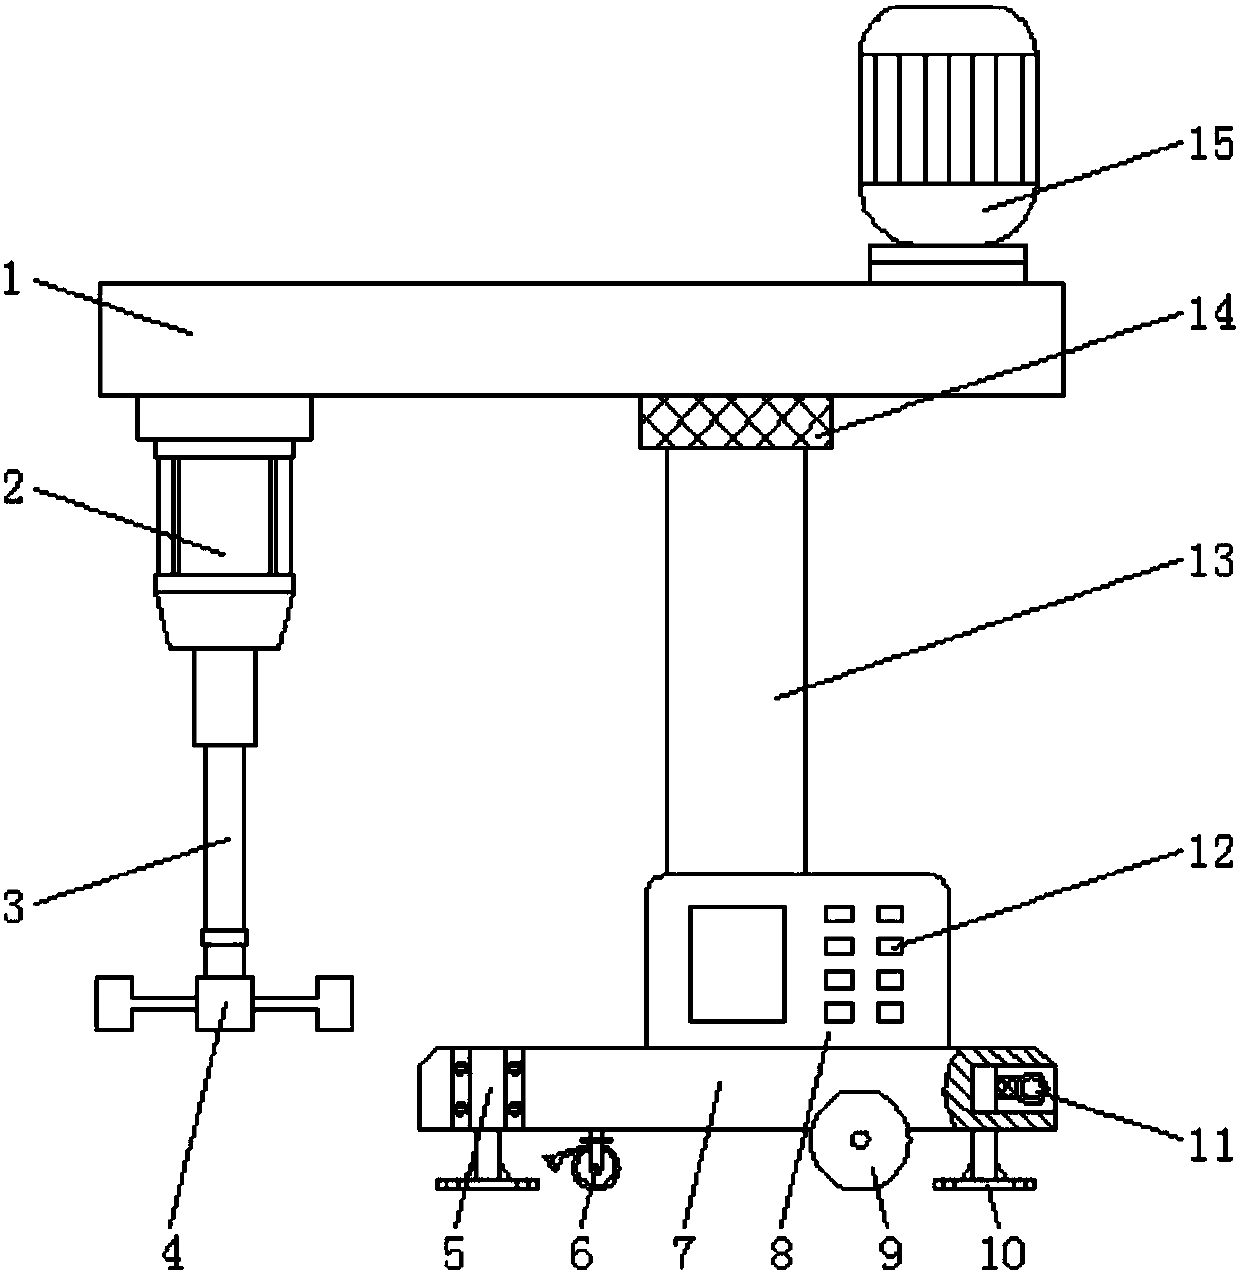 Dyeing agent scattering device